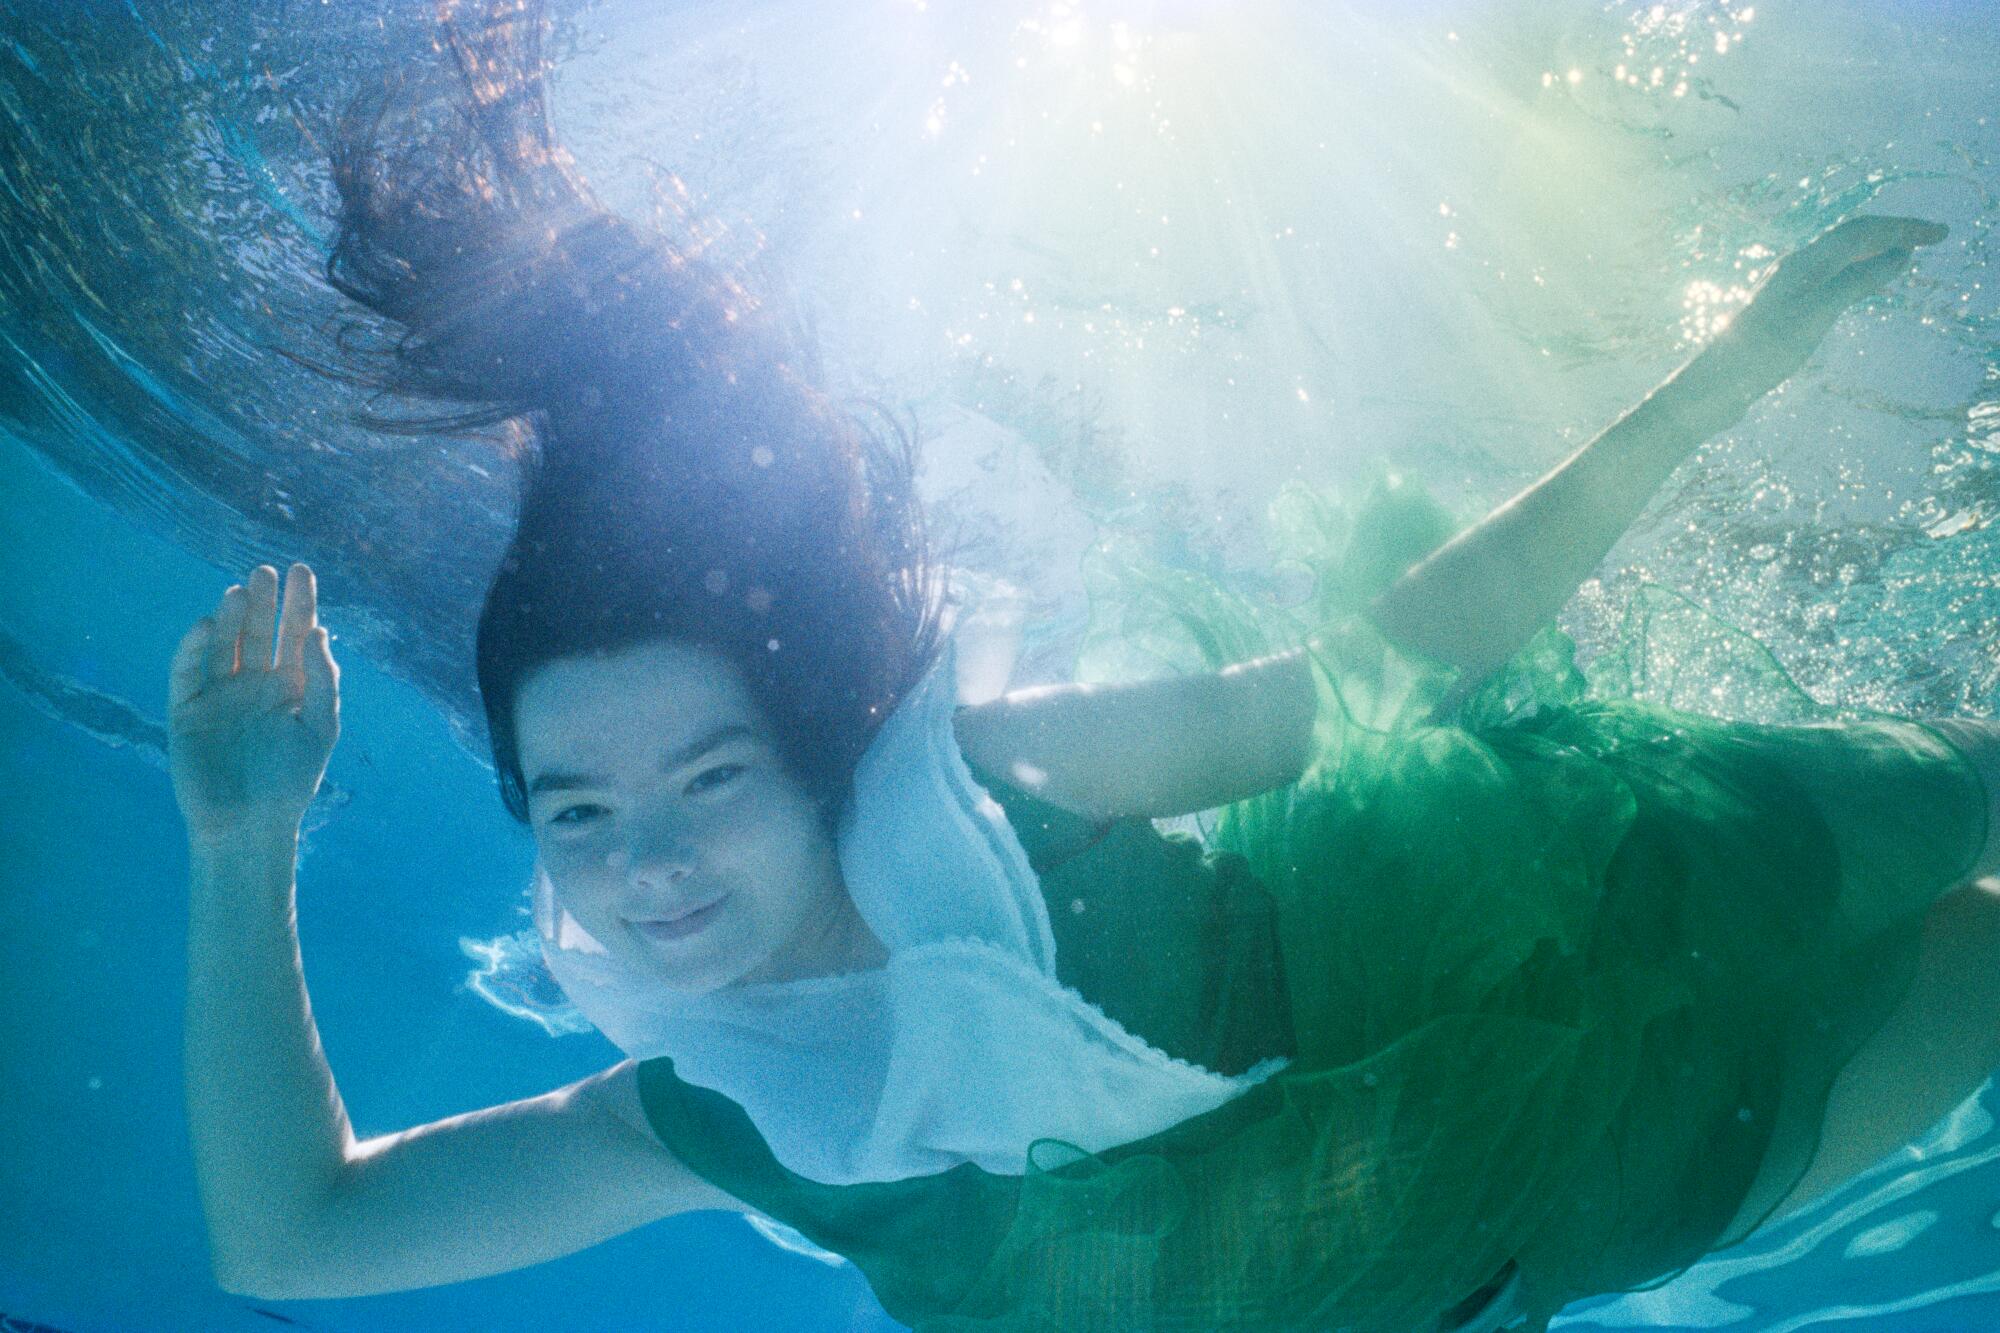 An underwater photo of a smiling woman in a pool with dark hair, wearing a green dress with a white collar